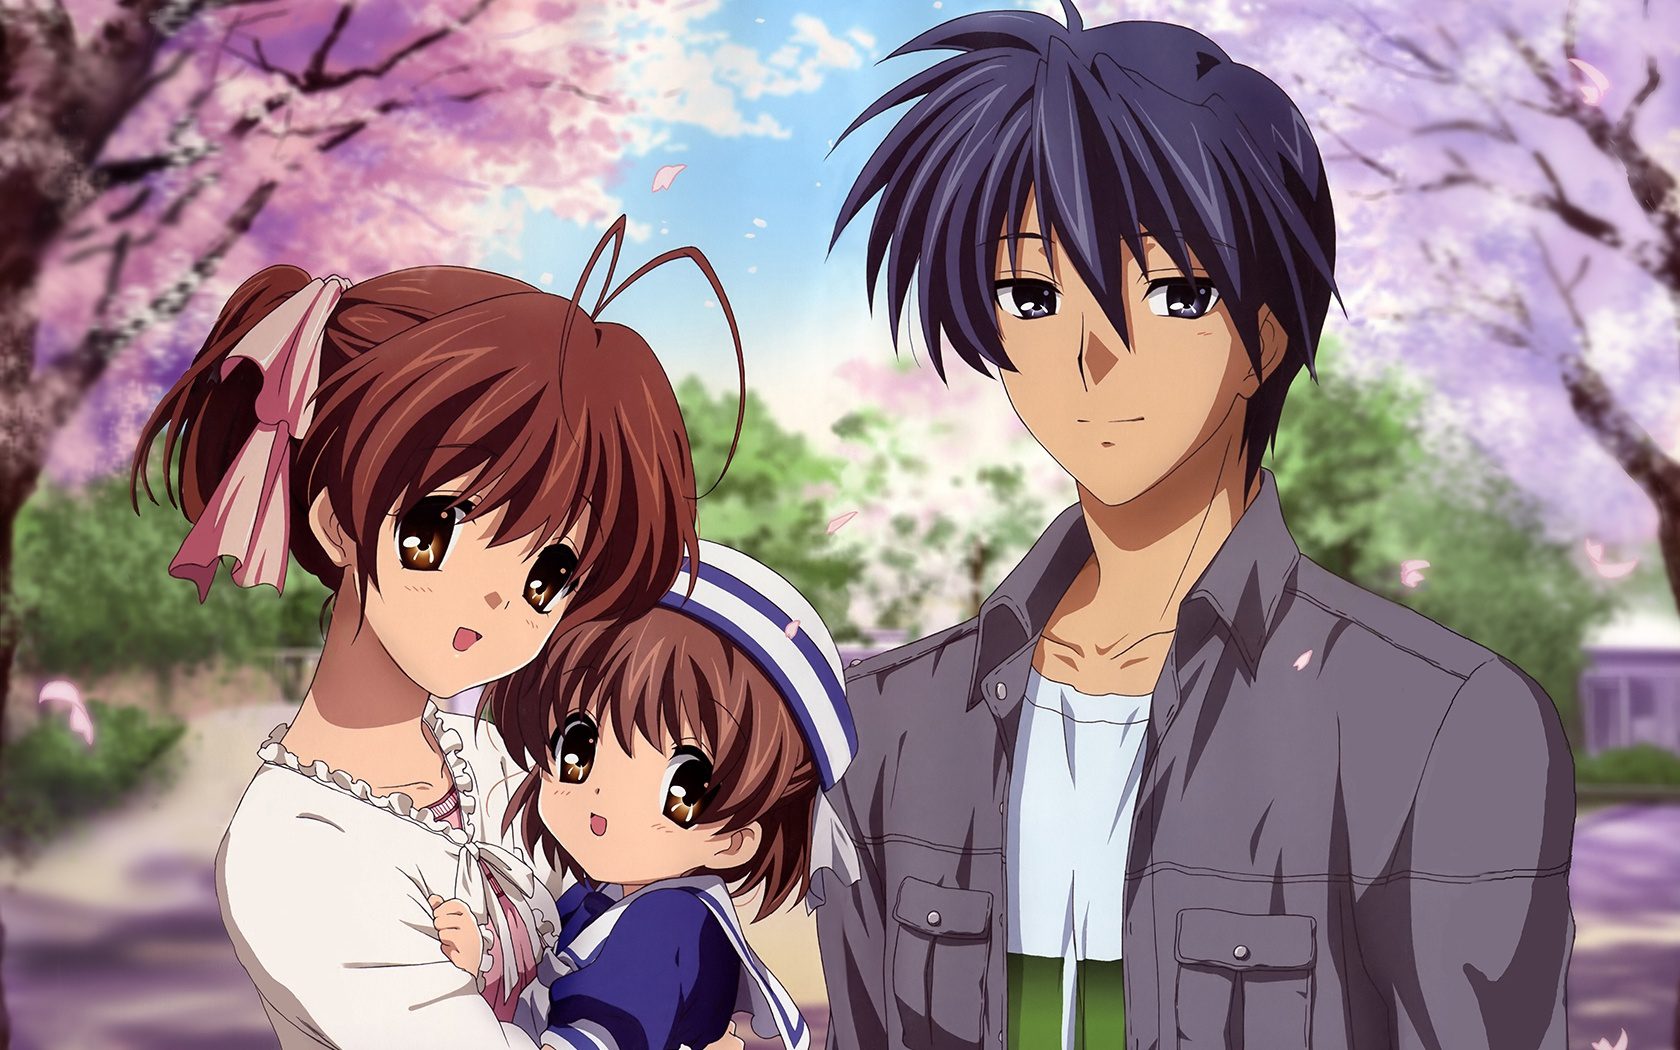 How To Watch Clannad: Watch Order, Fillers & Episode List